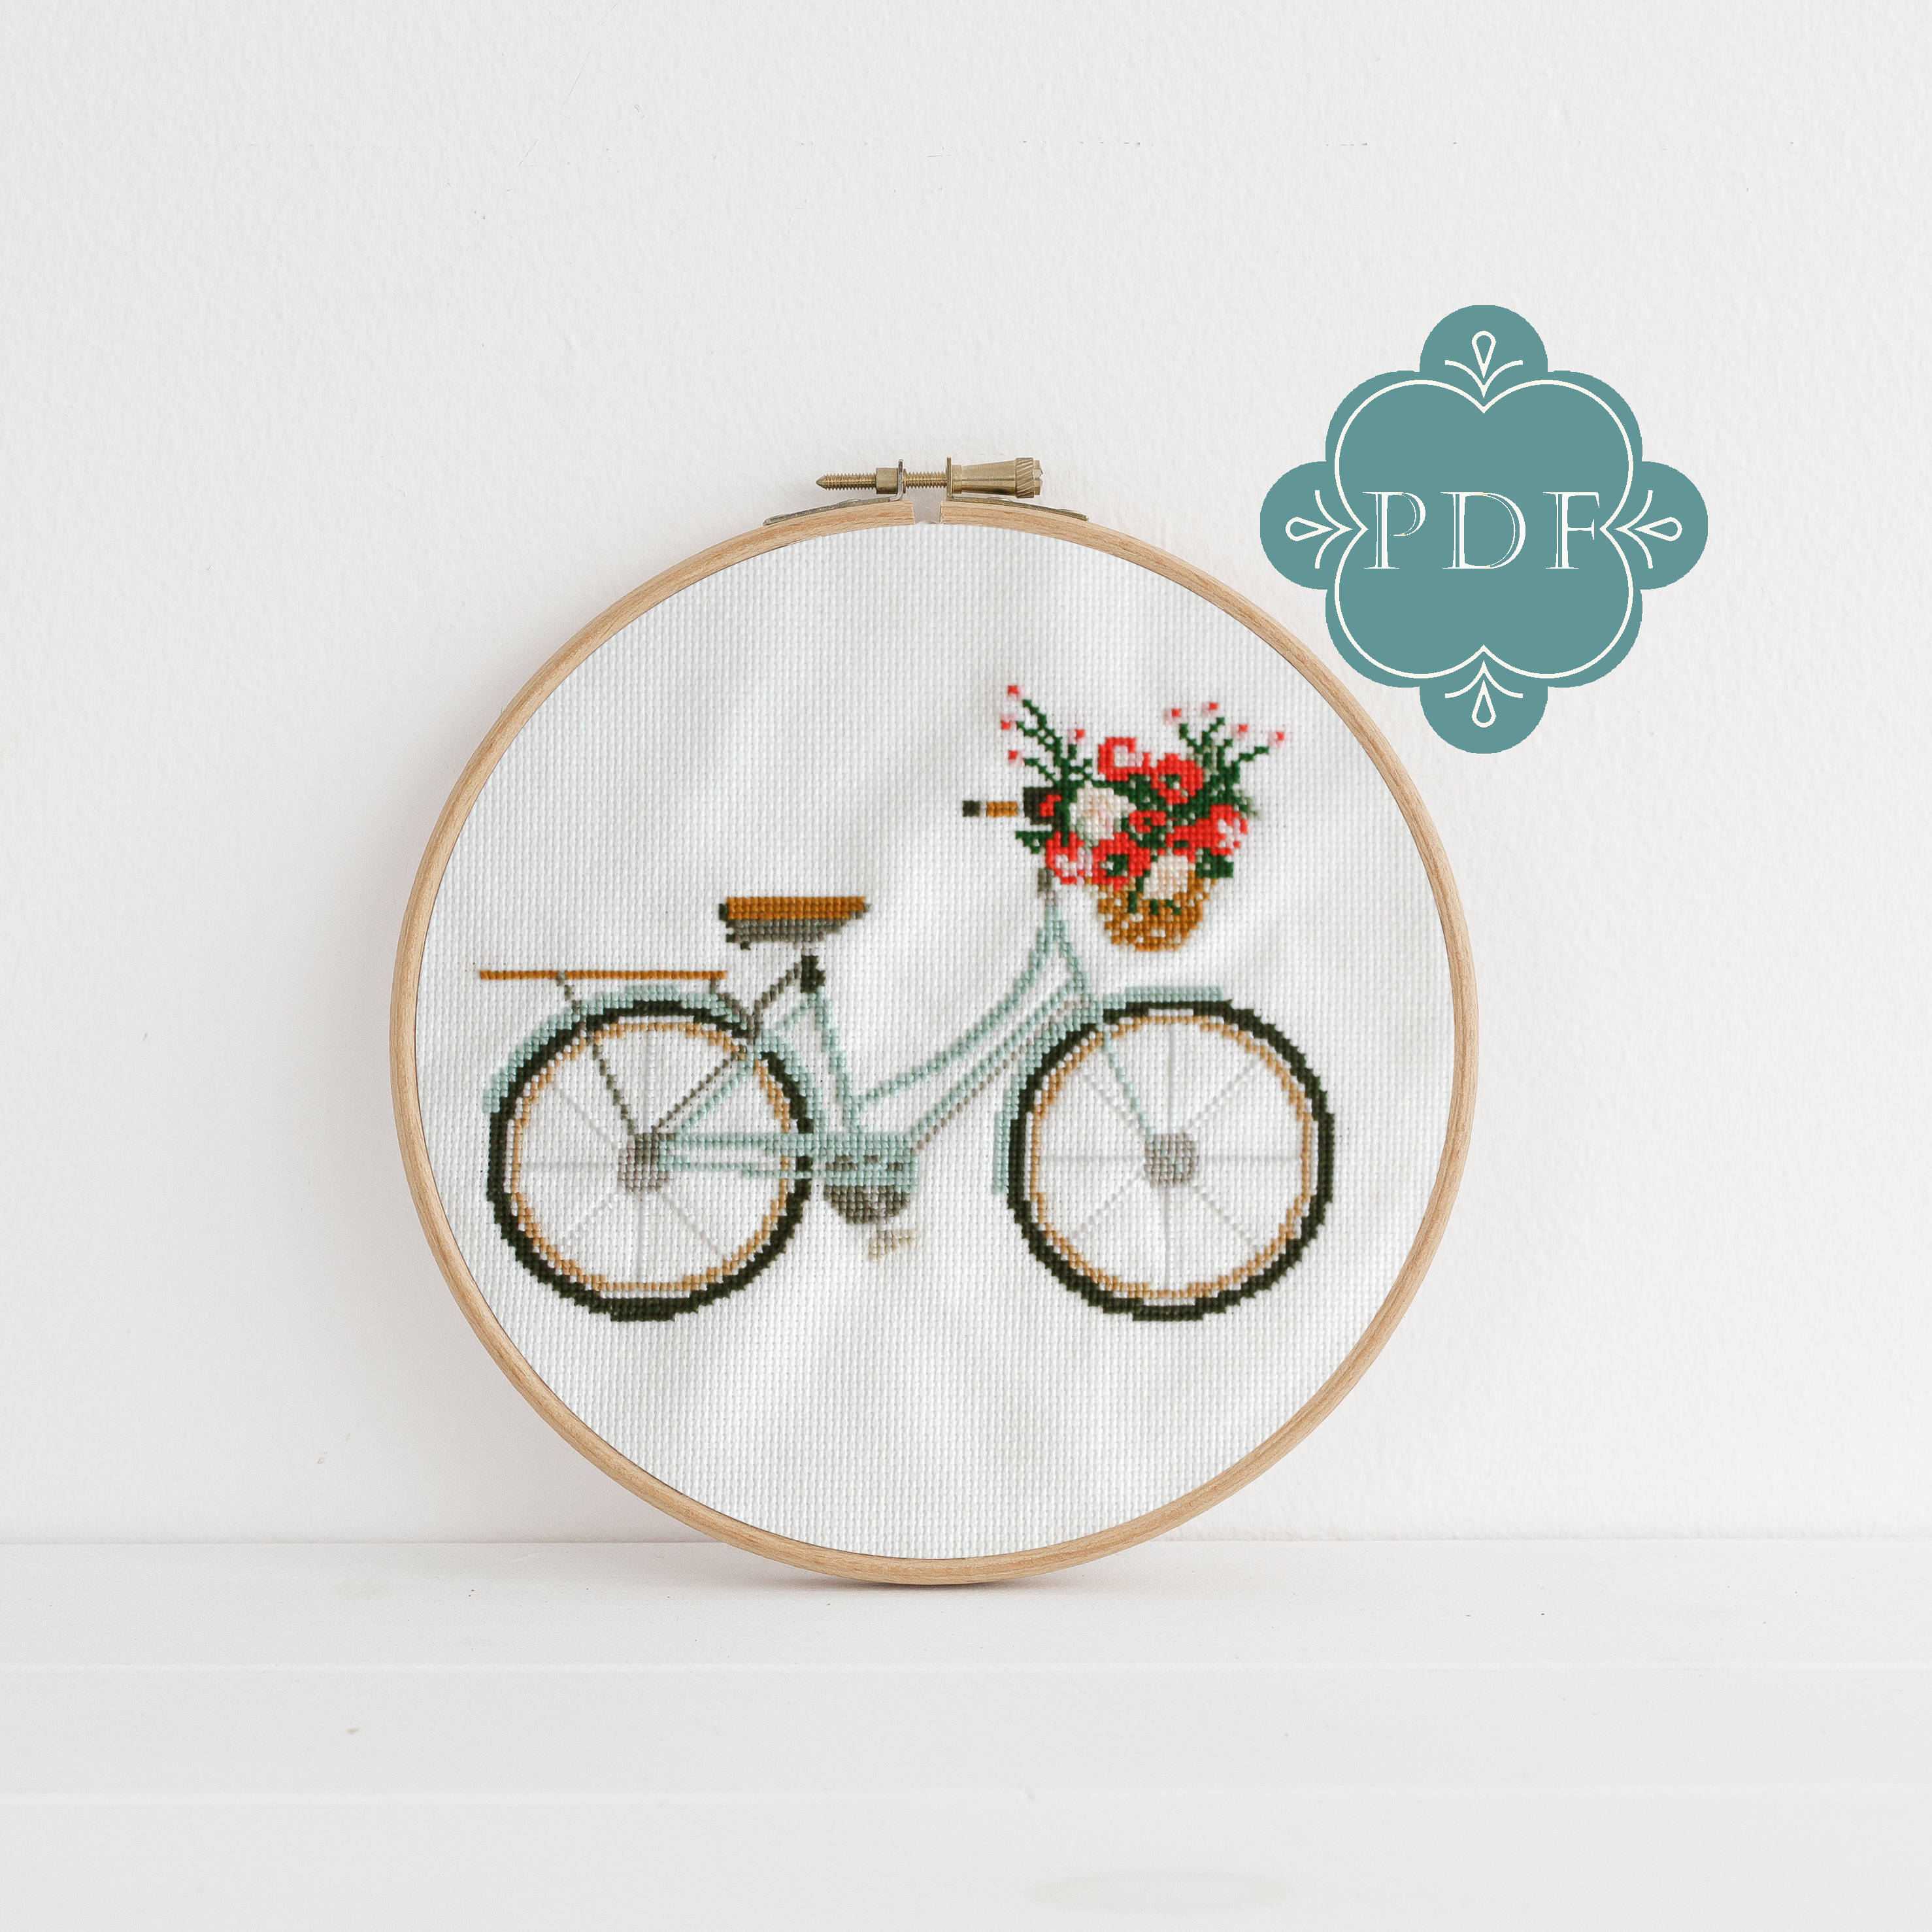 Dmc Embroidery Patterns Pdf Counted Cross Stitch Lovely Day Bicycle Cross Stitch Diy How